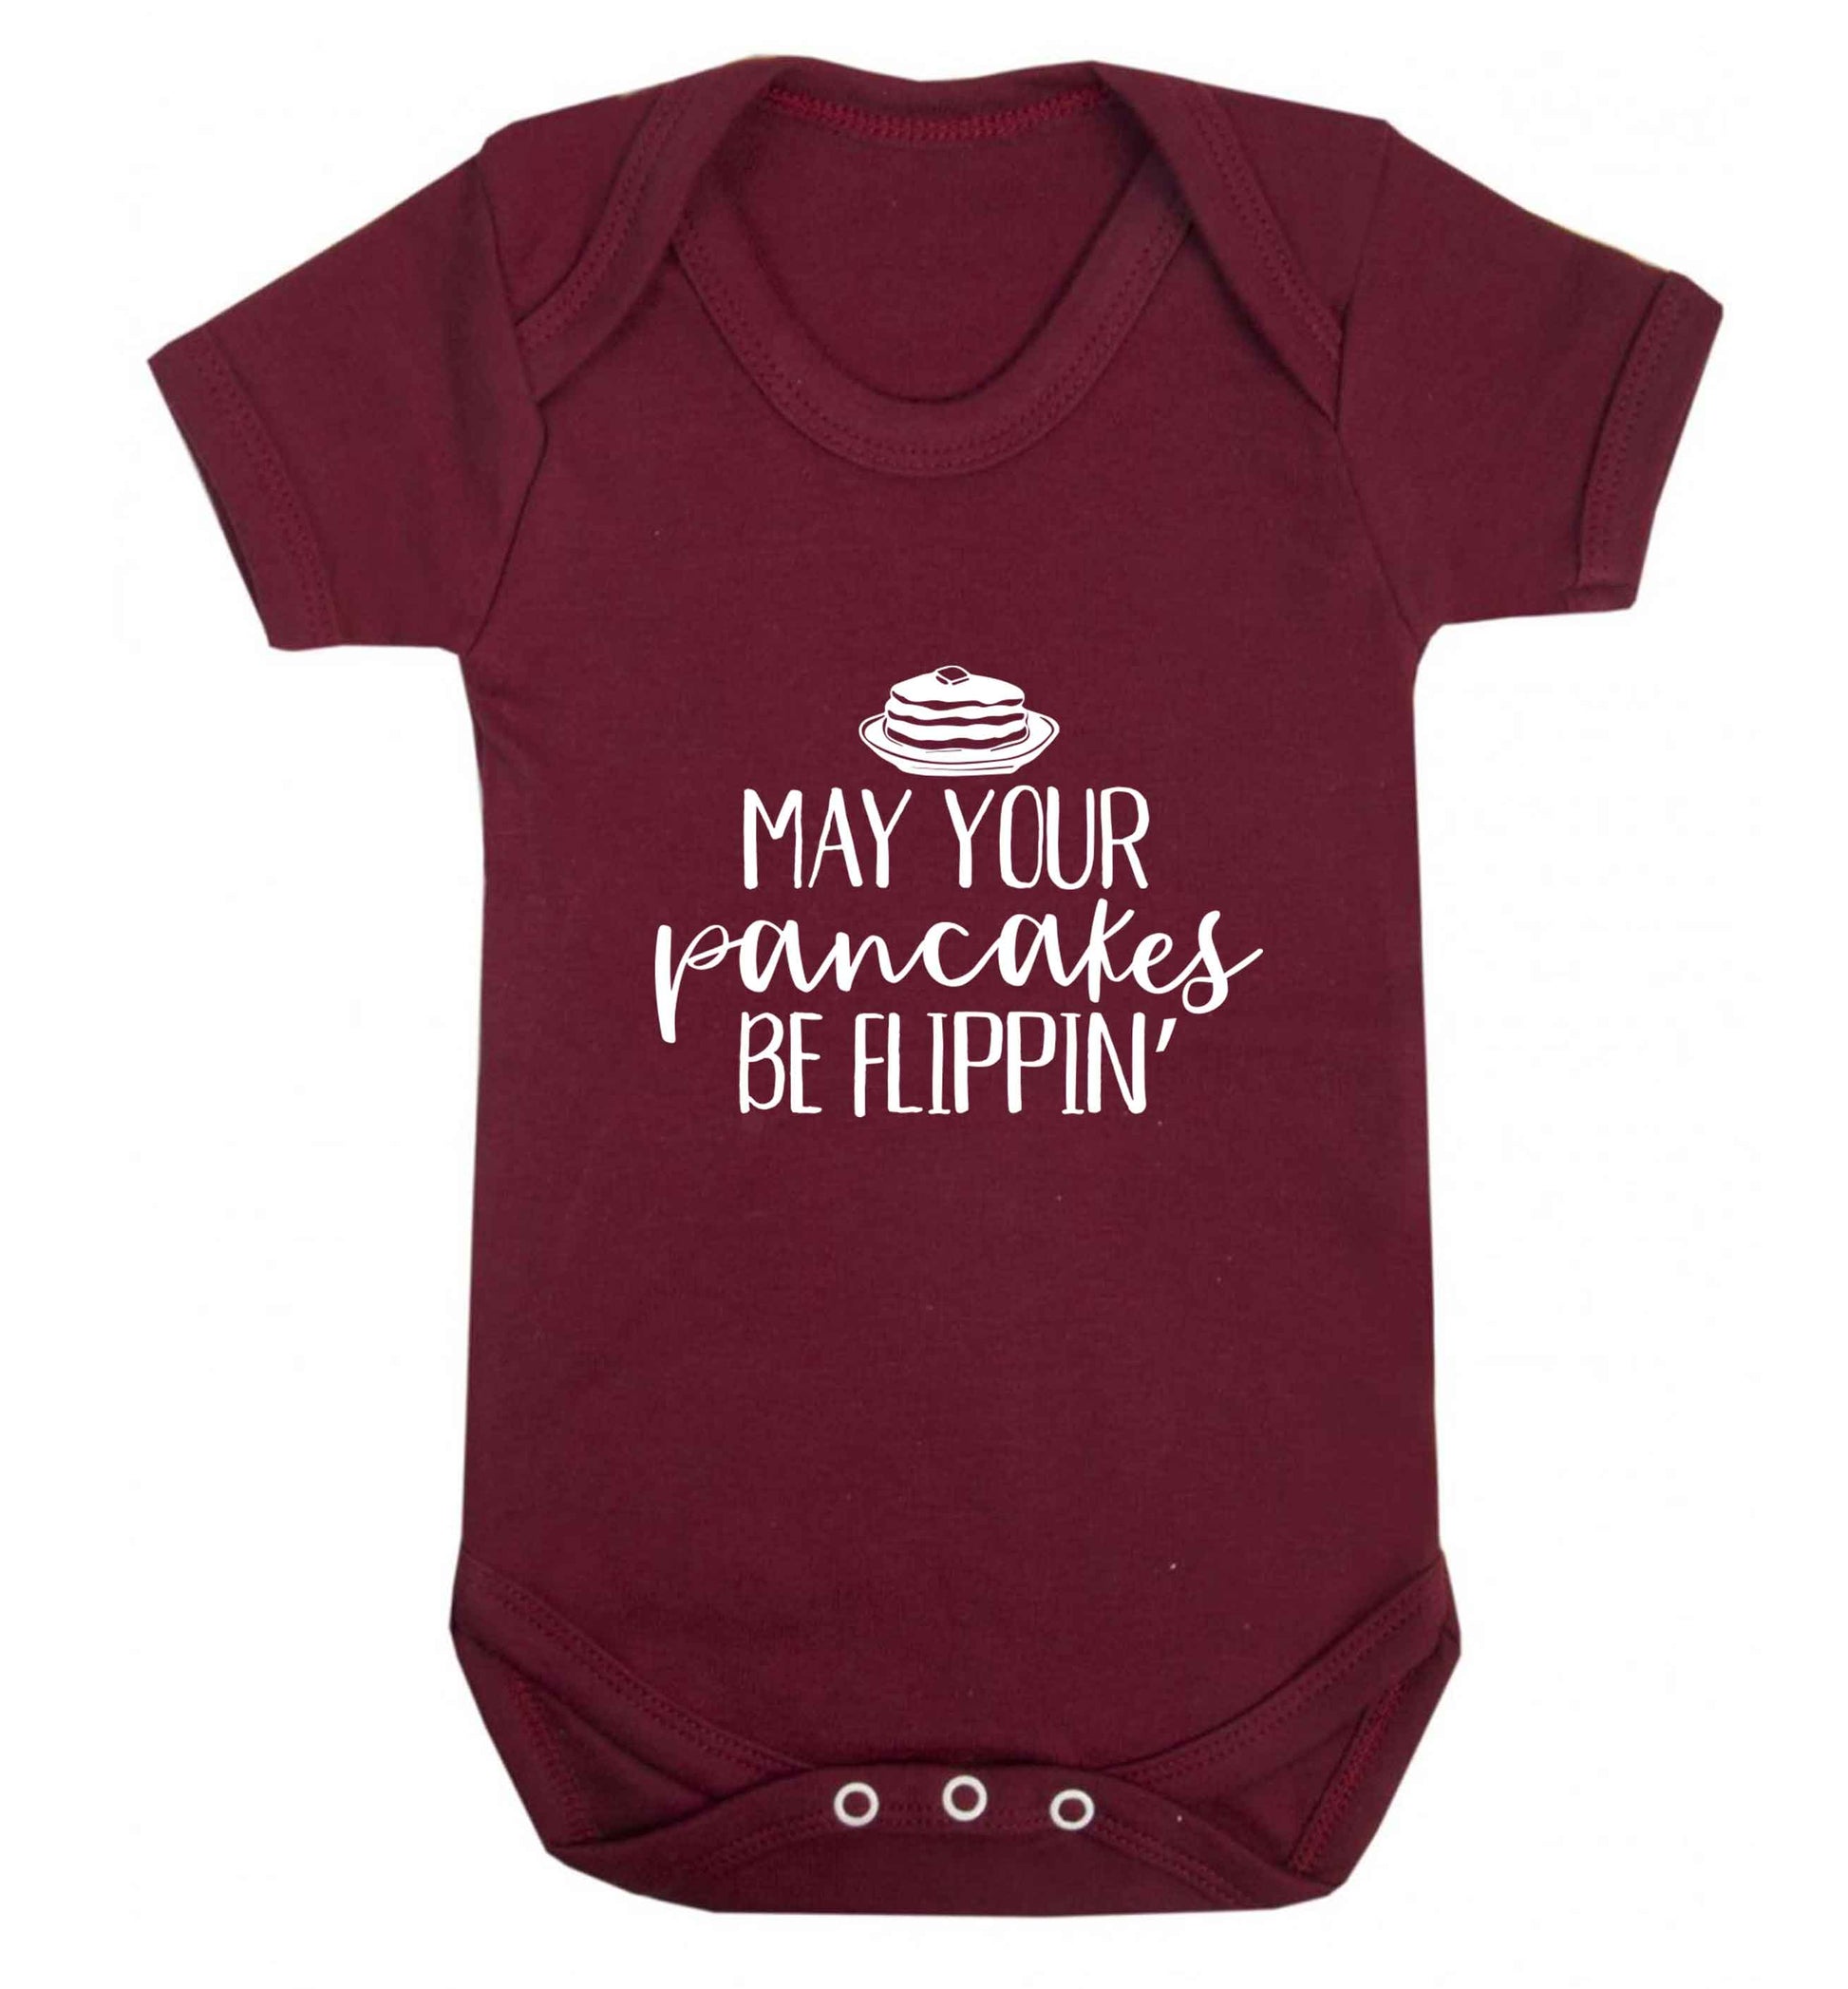 May your pancakes be flippin' baby vest maroon 18-24 months